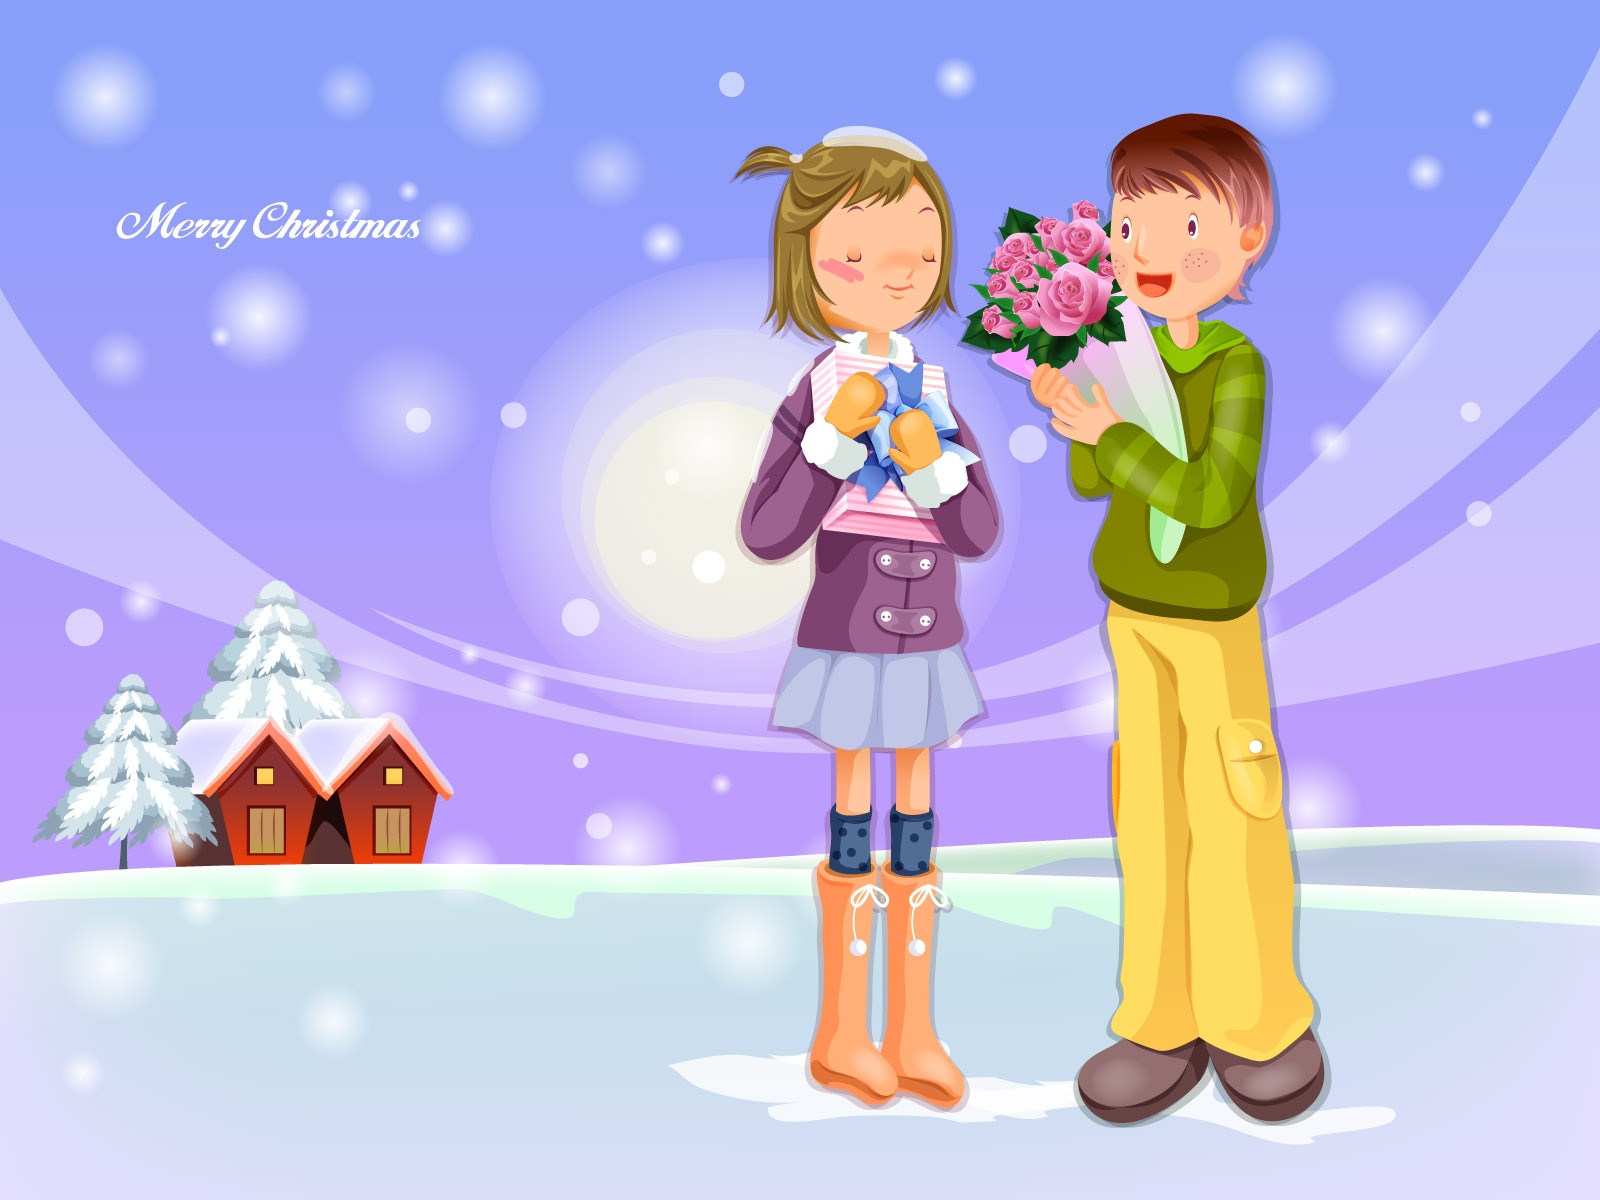 Sweet Christmas Gifts Wallpaper in jpg format for free download